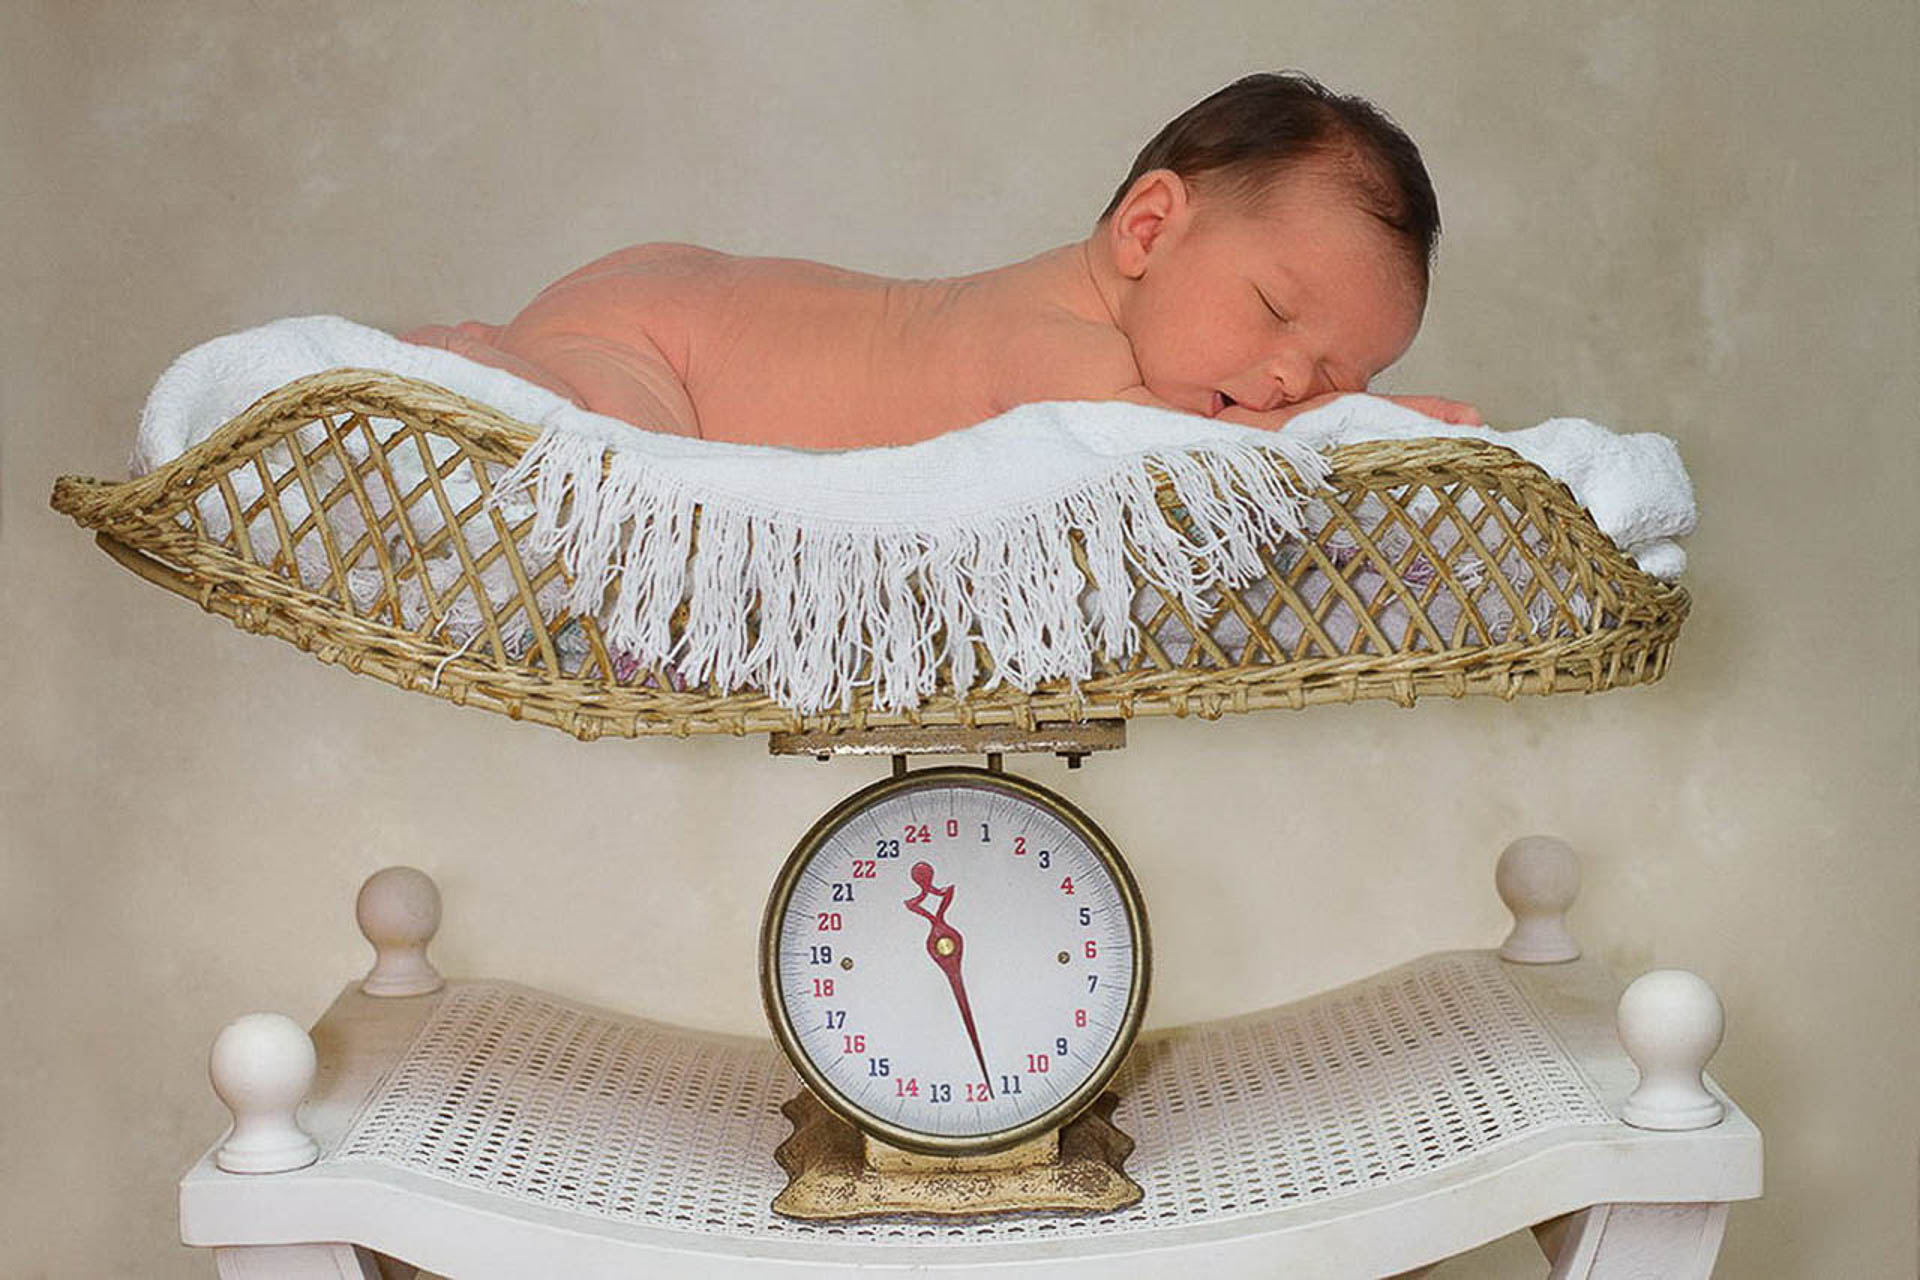 Baby boy photographed on a digital scale with his actual weight at birth 11 and one half pounds